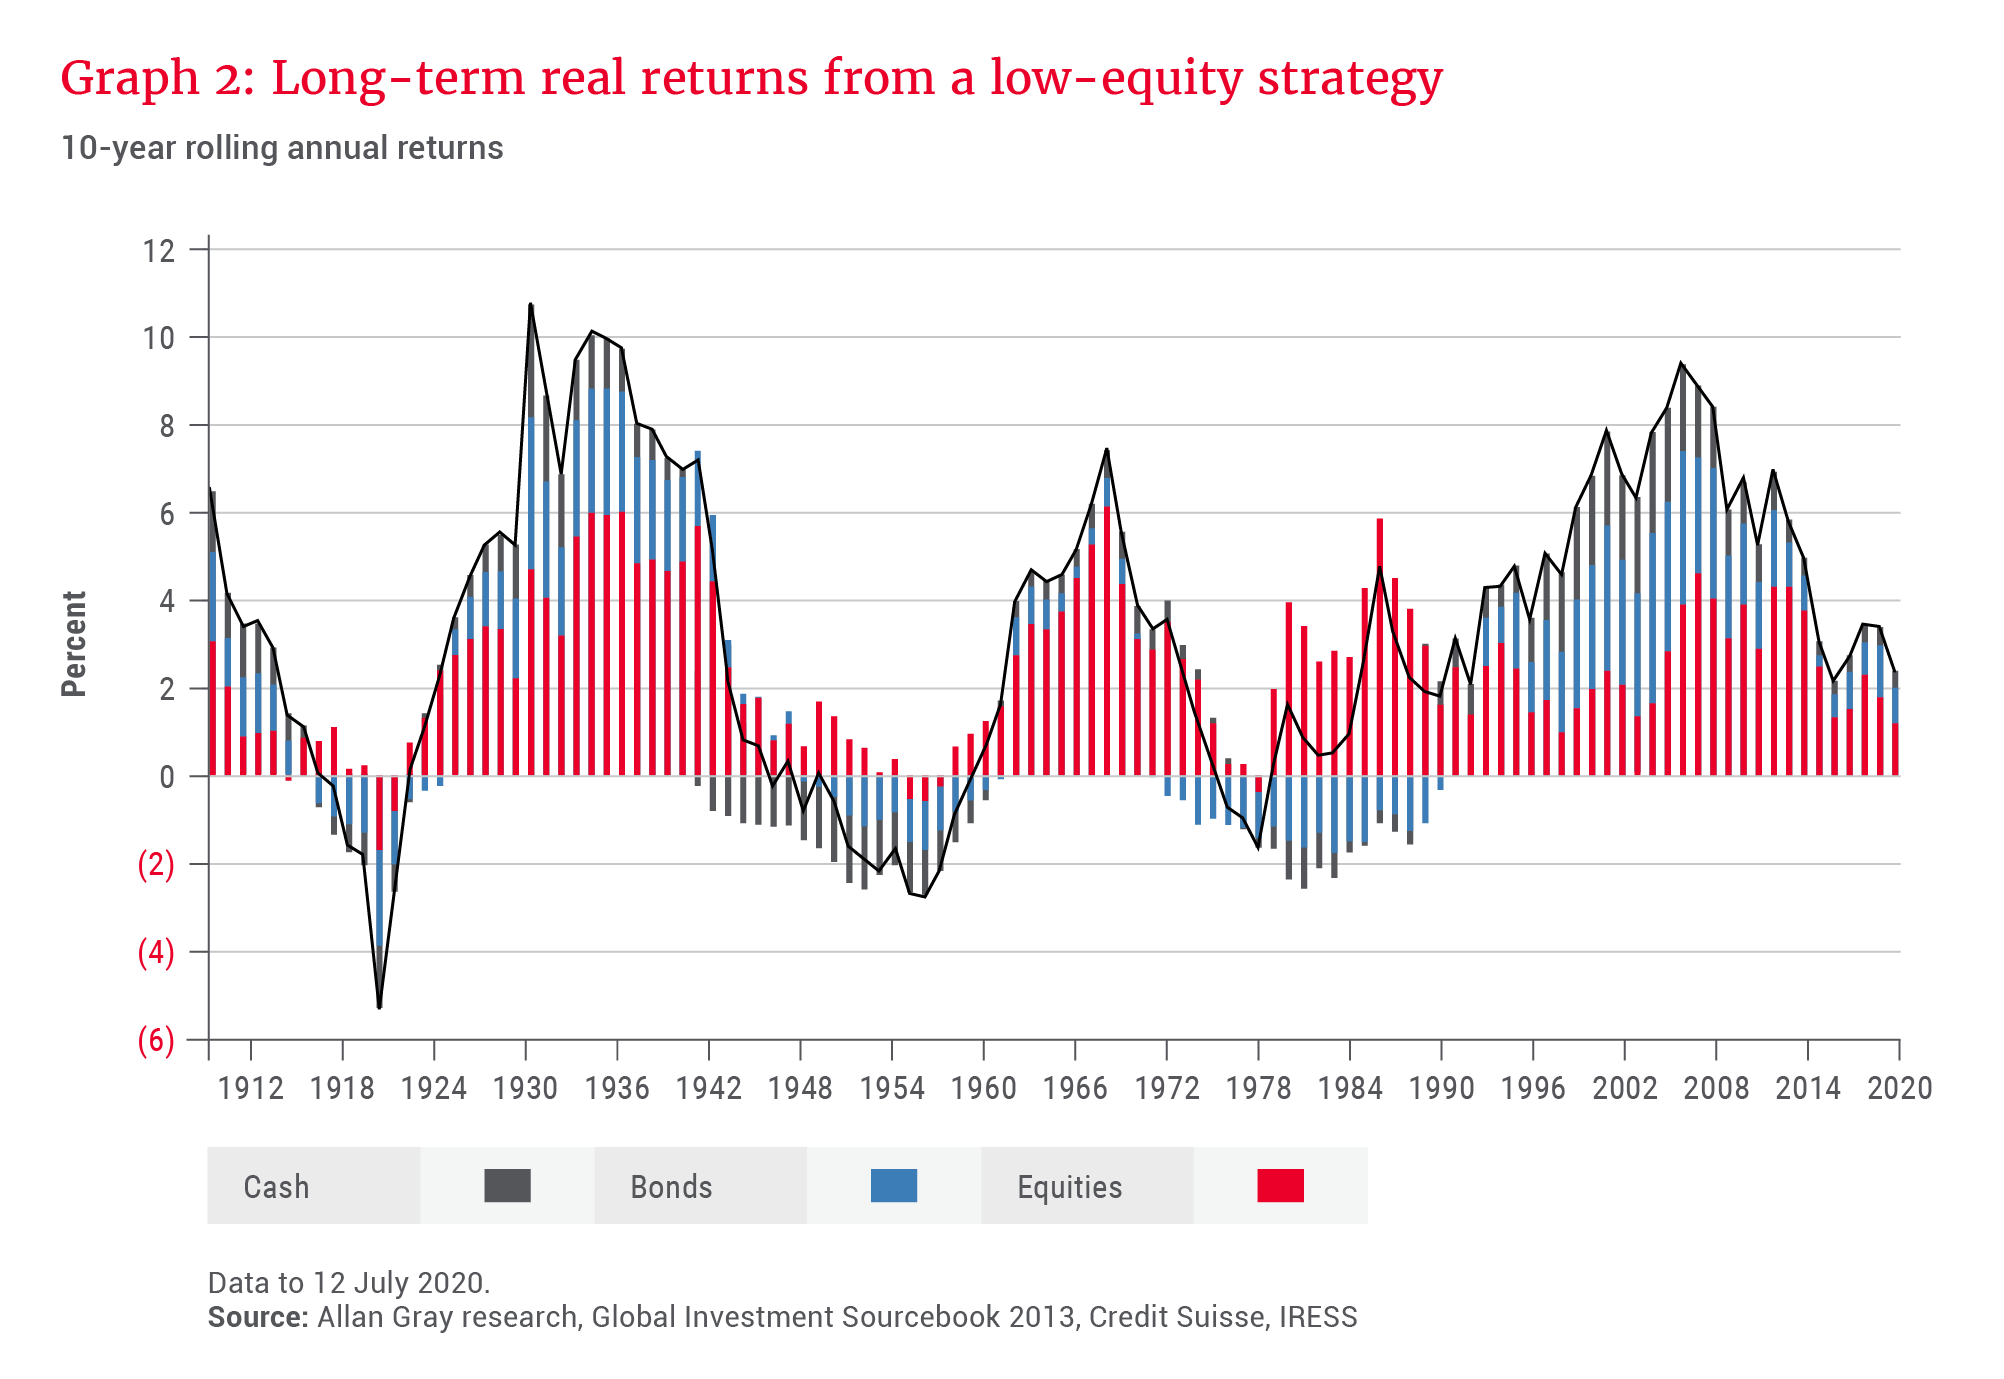 Long-term real returns from a low-equity strategy - Allan Gray